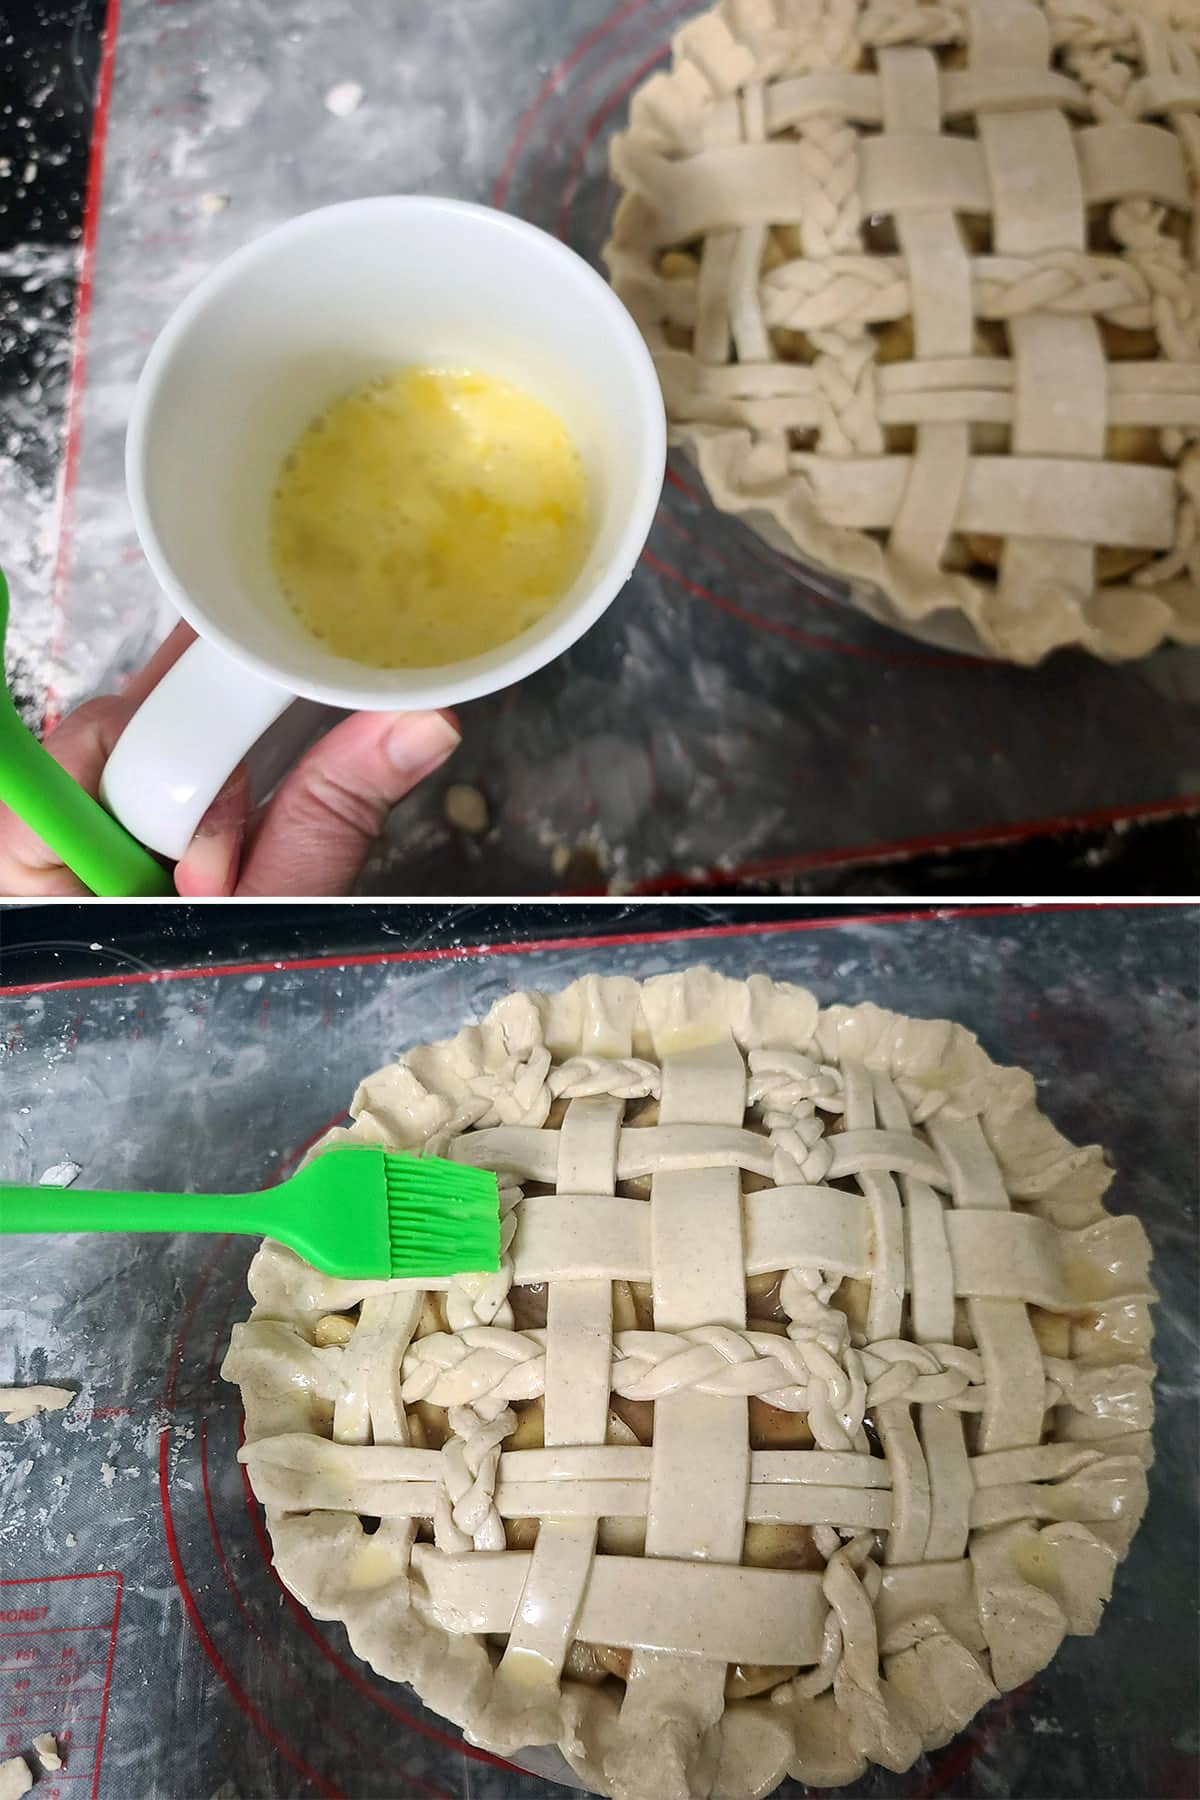 A 2 part image showing the egg wash being mixed and brushed over the gluten free pie.